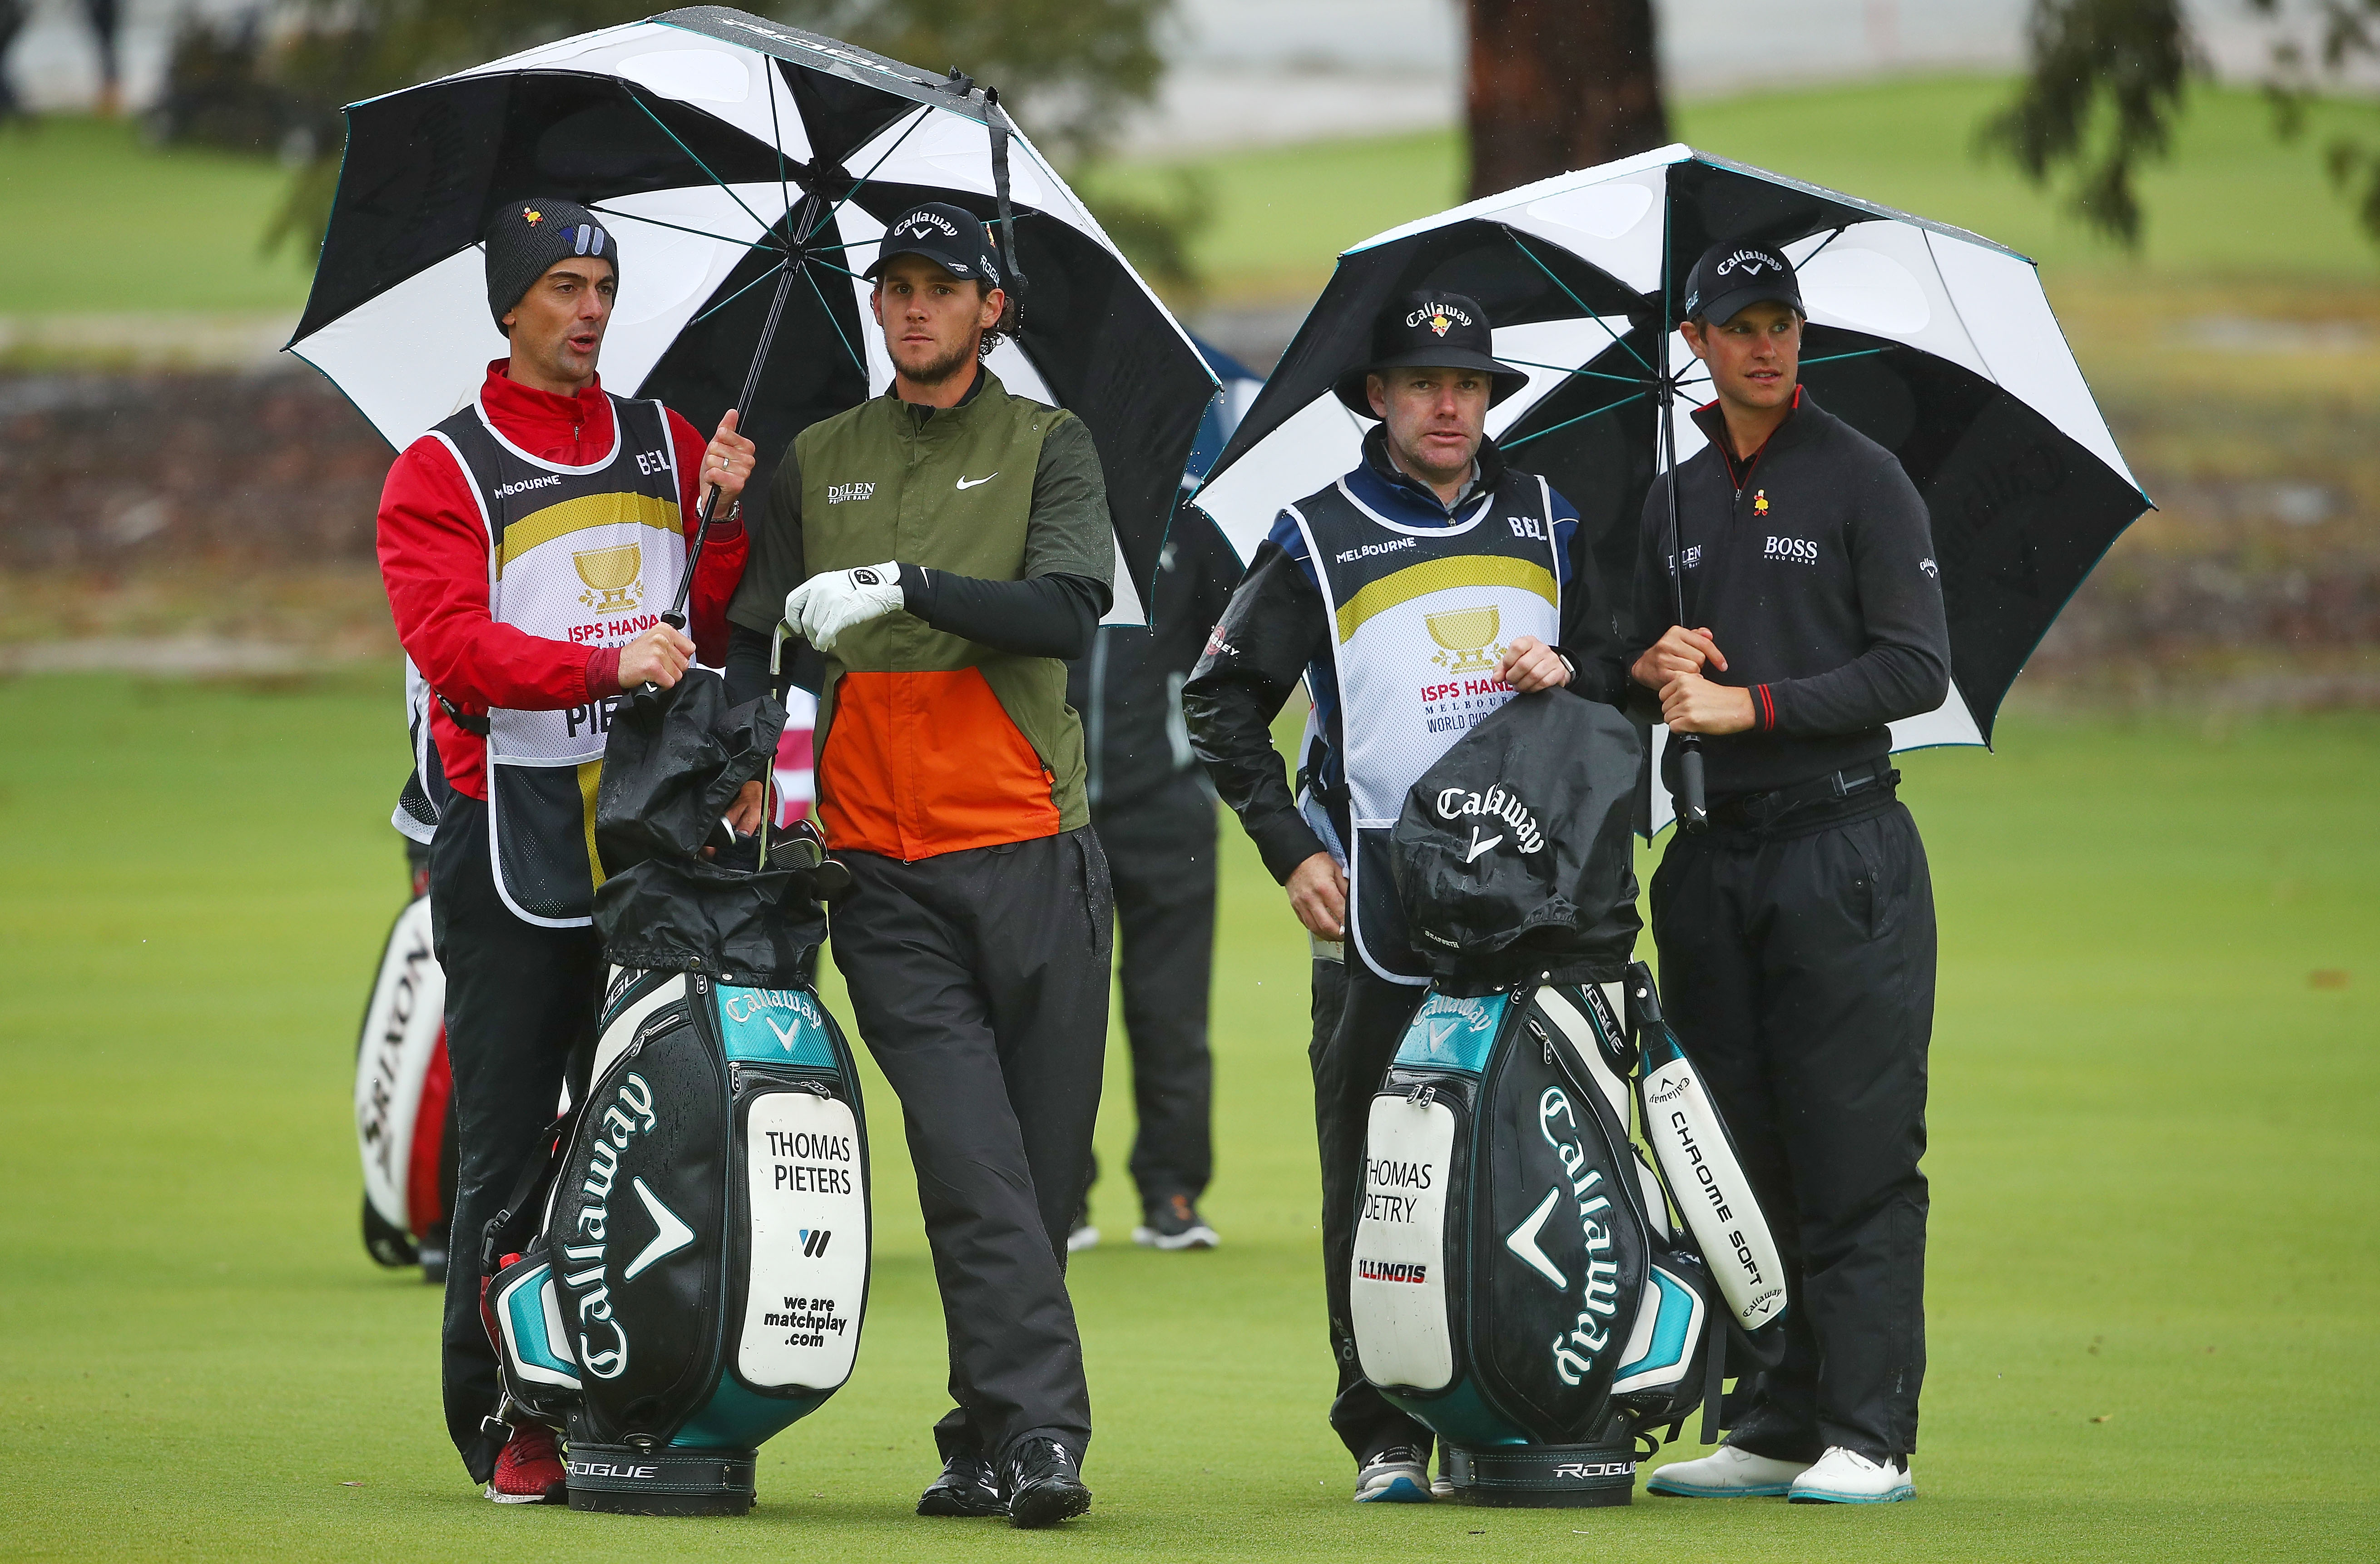 Thomas Detry (Right) and caddy Ryan McGuigan (Second from Right) with Thomas Pieters of Belgium and his caddy  talk on the 9th hole during day two of the 2018 World Cup of Golf at The Metropolitan on November 23, 2018 in Melbourne.